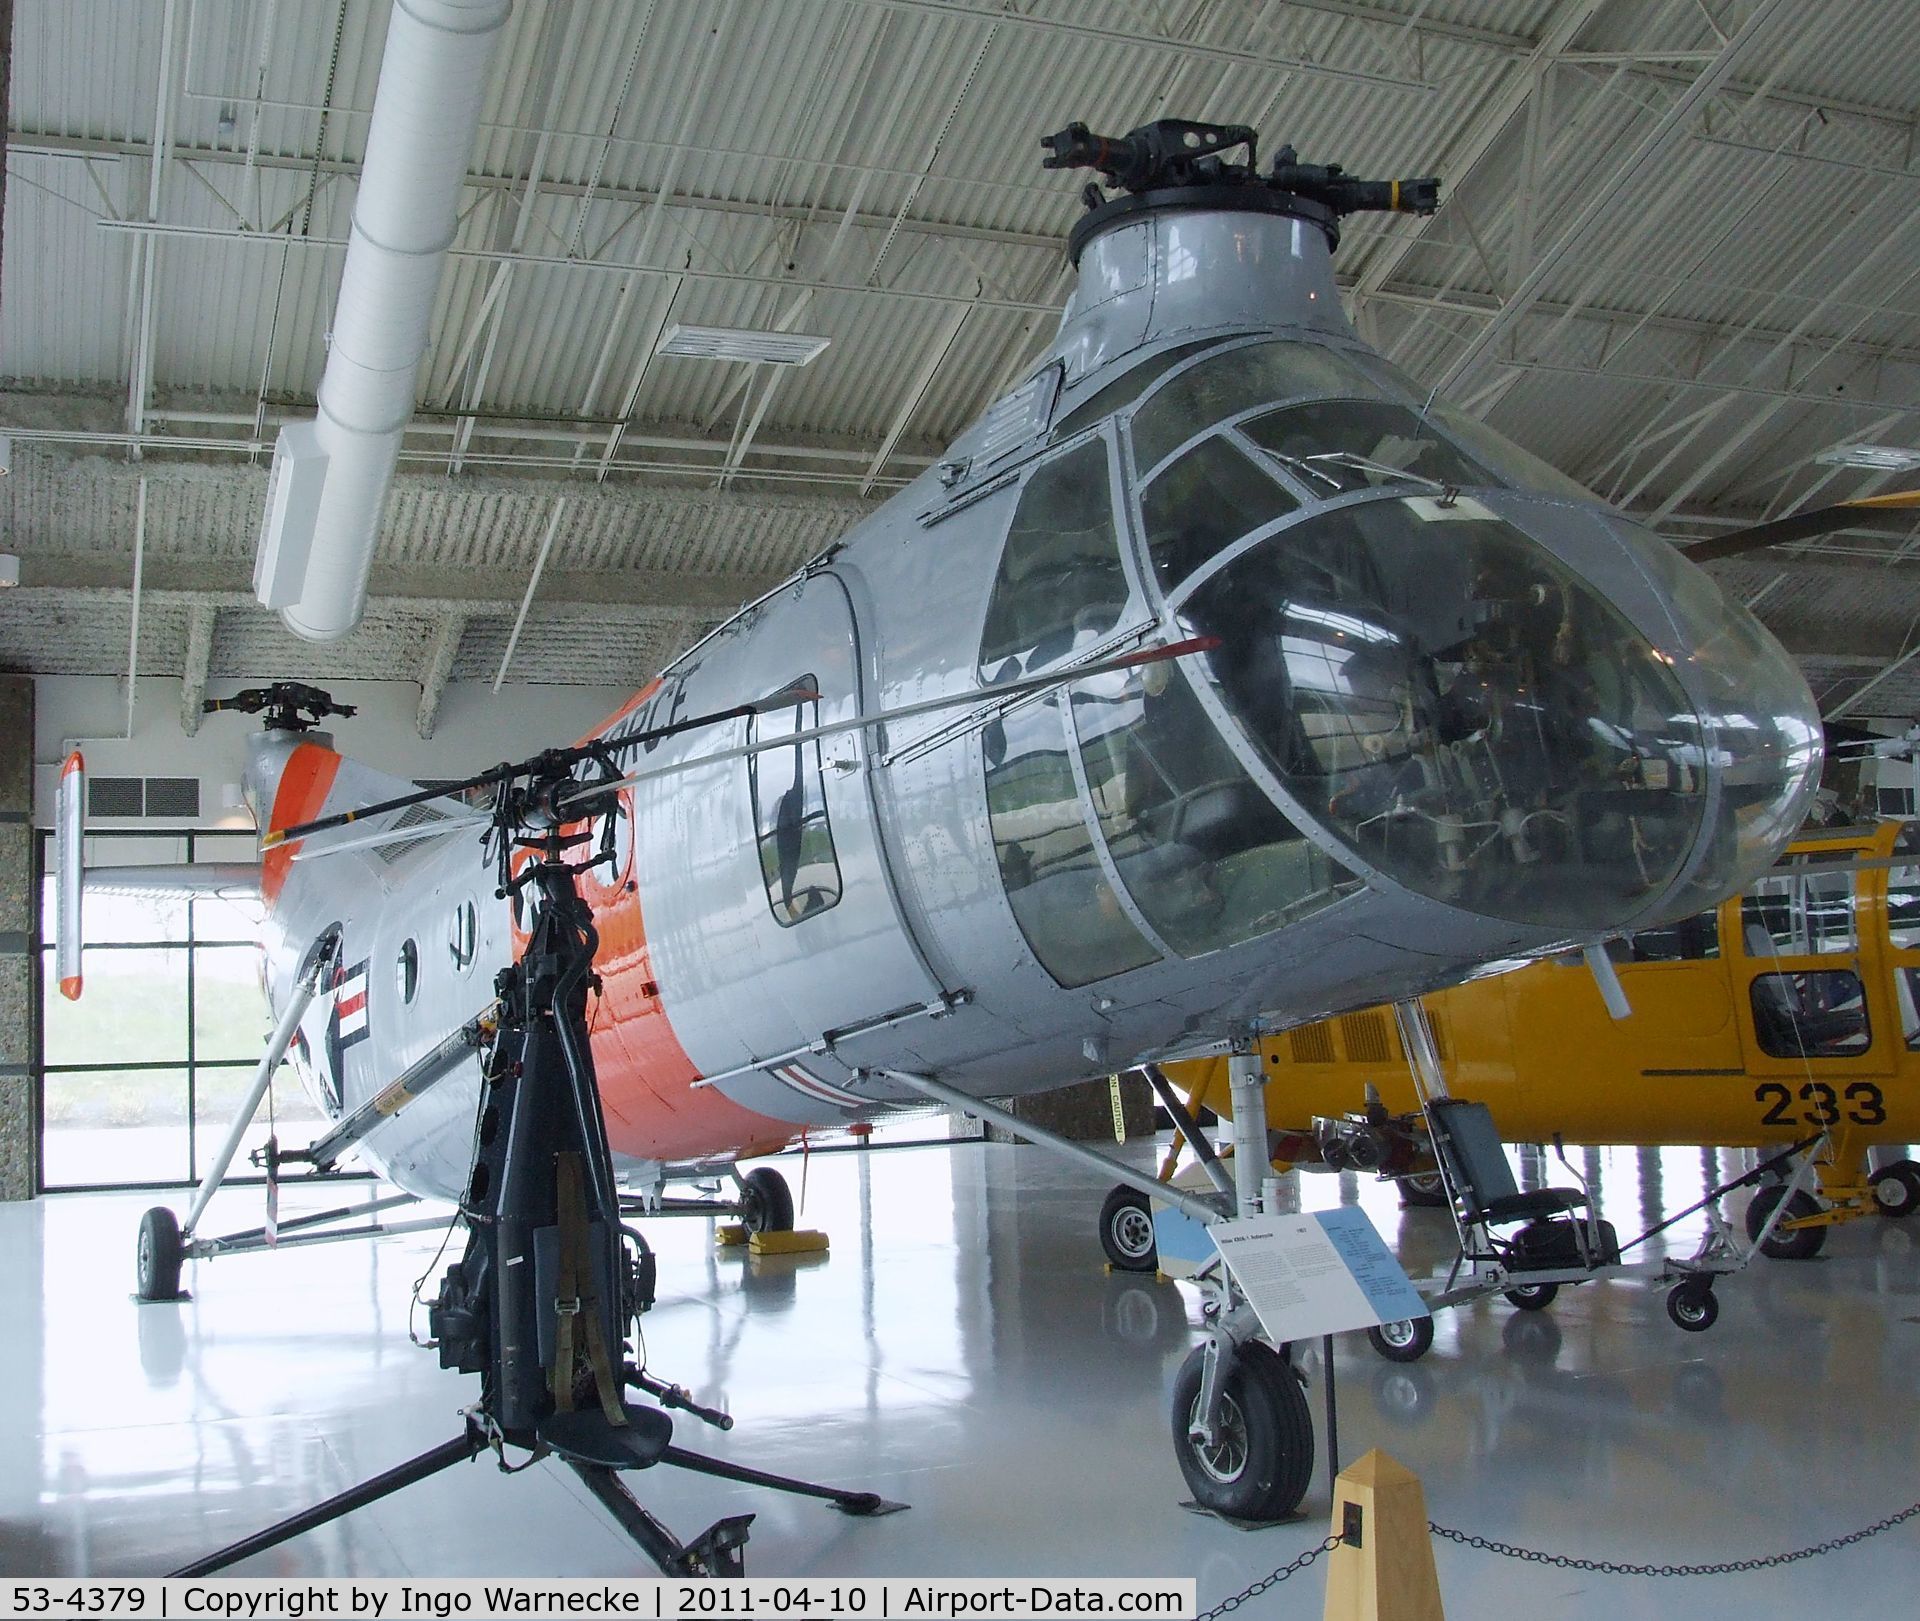 53-4379, 1953 Piasecki CH-21B Workhorse C/N B.129, Piasecki CH-21B Workhorse/Shawnee at the Evergreen Aviation & Space Museum, McMinnville OR